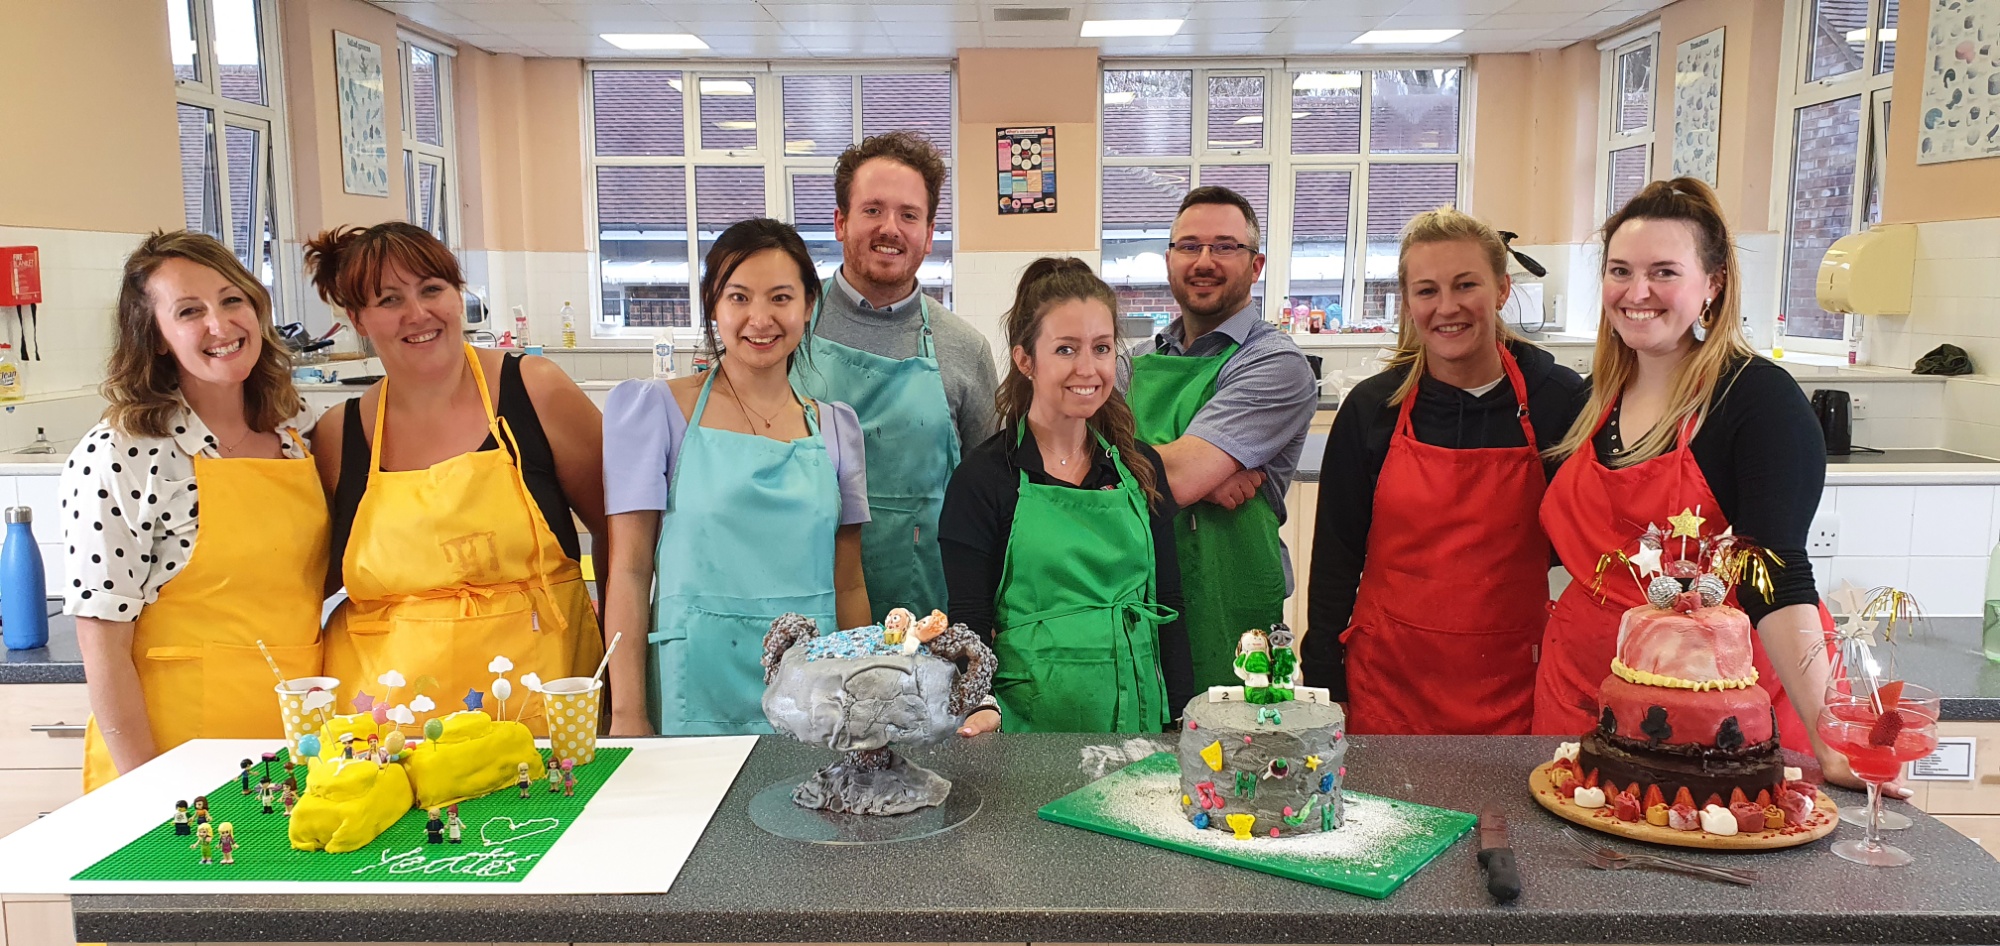 Lingfield College House Team competing in a Bake-Off 